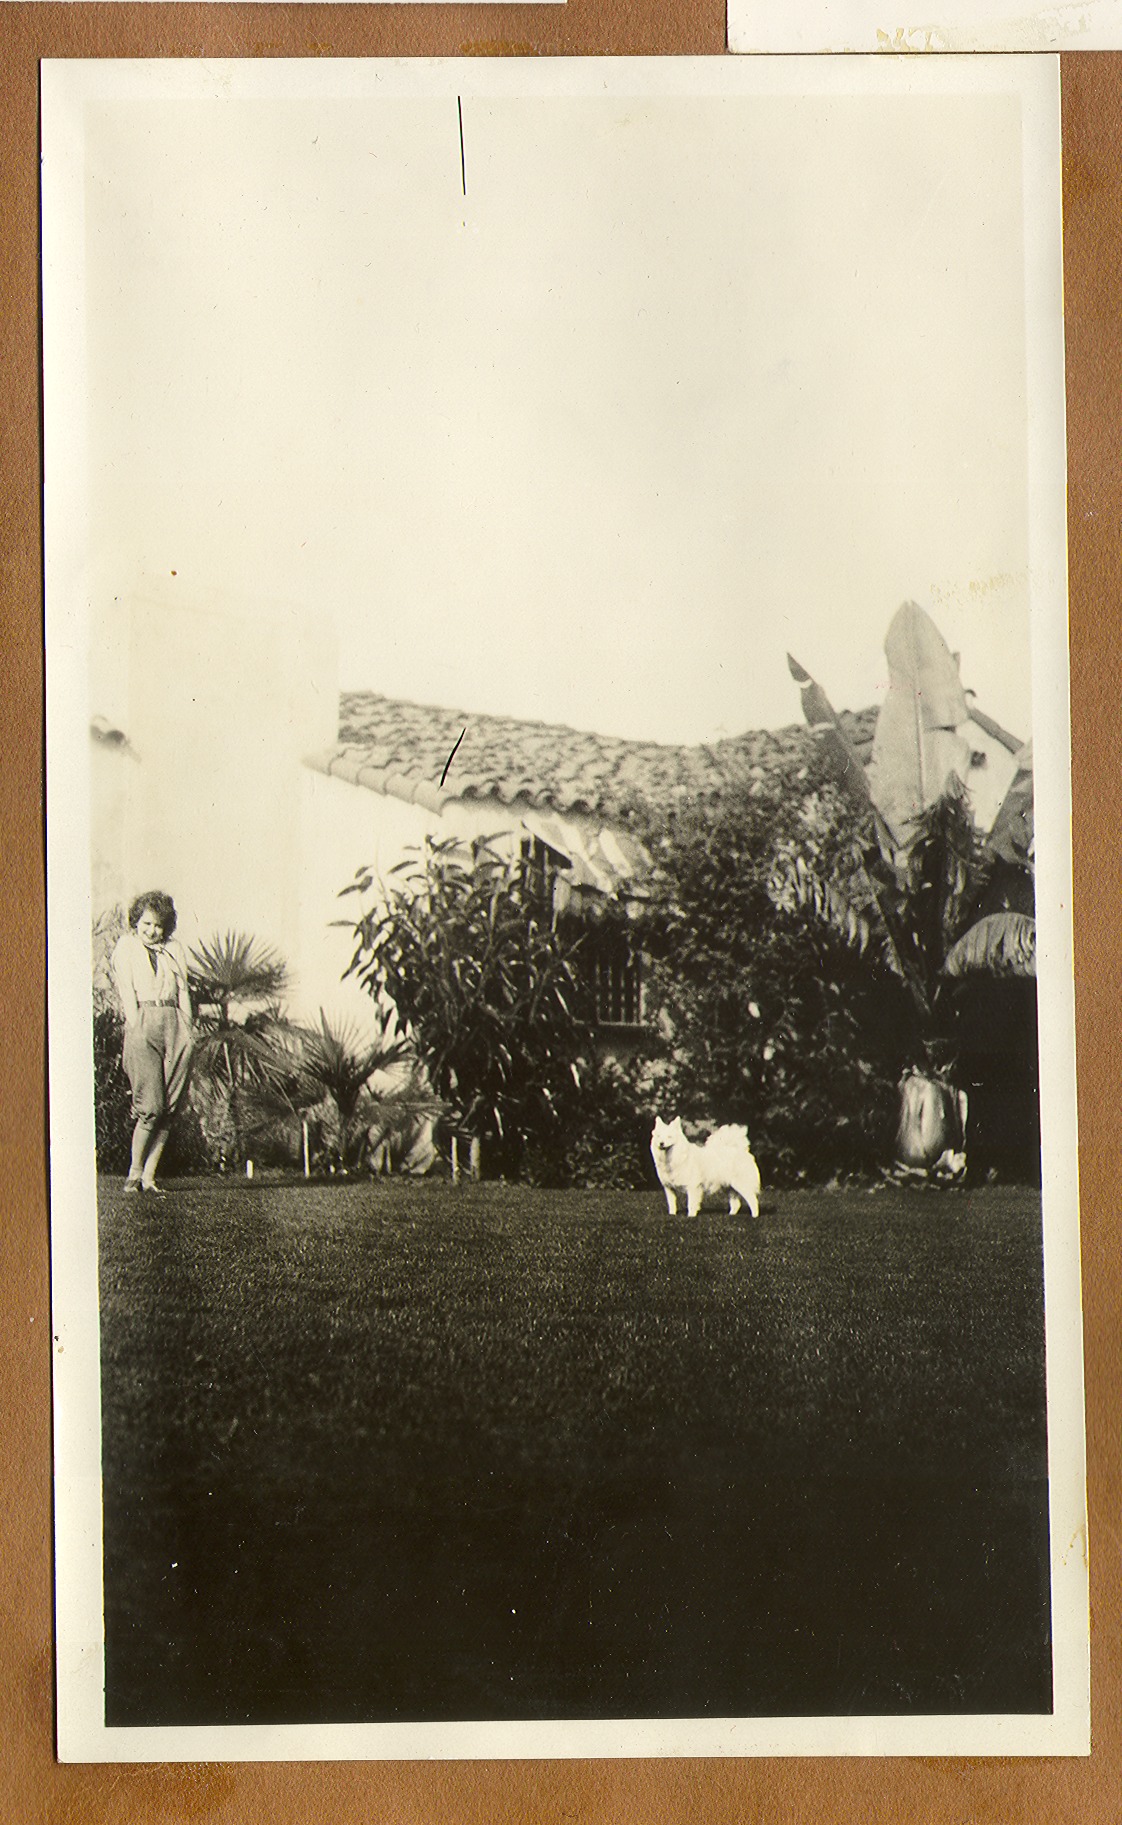 Clara and dog on the lawn at the ranch house: photographic print